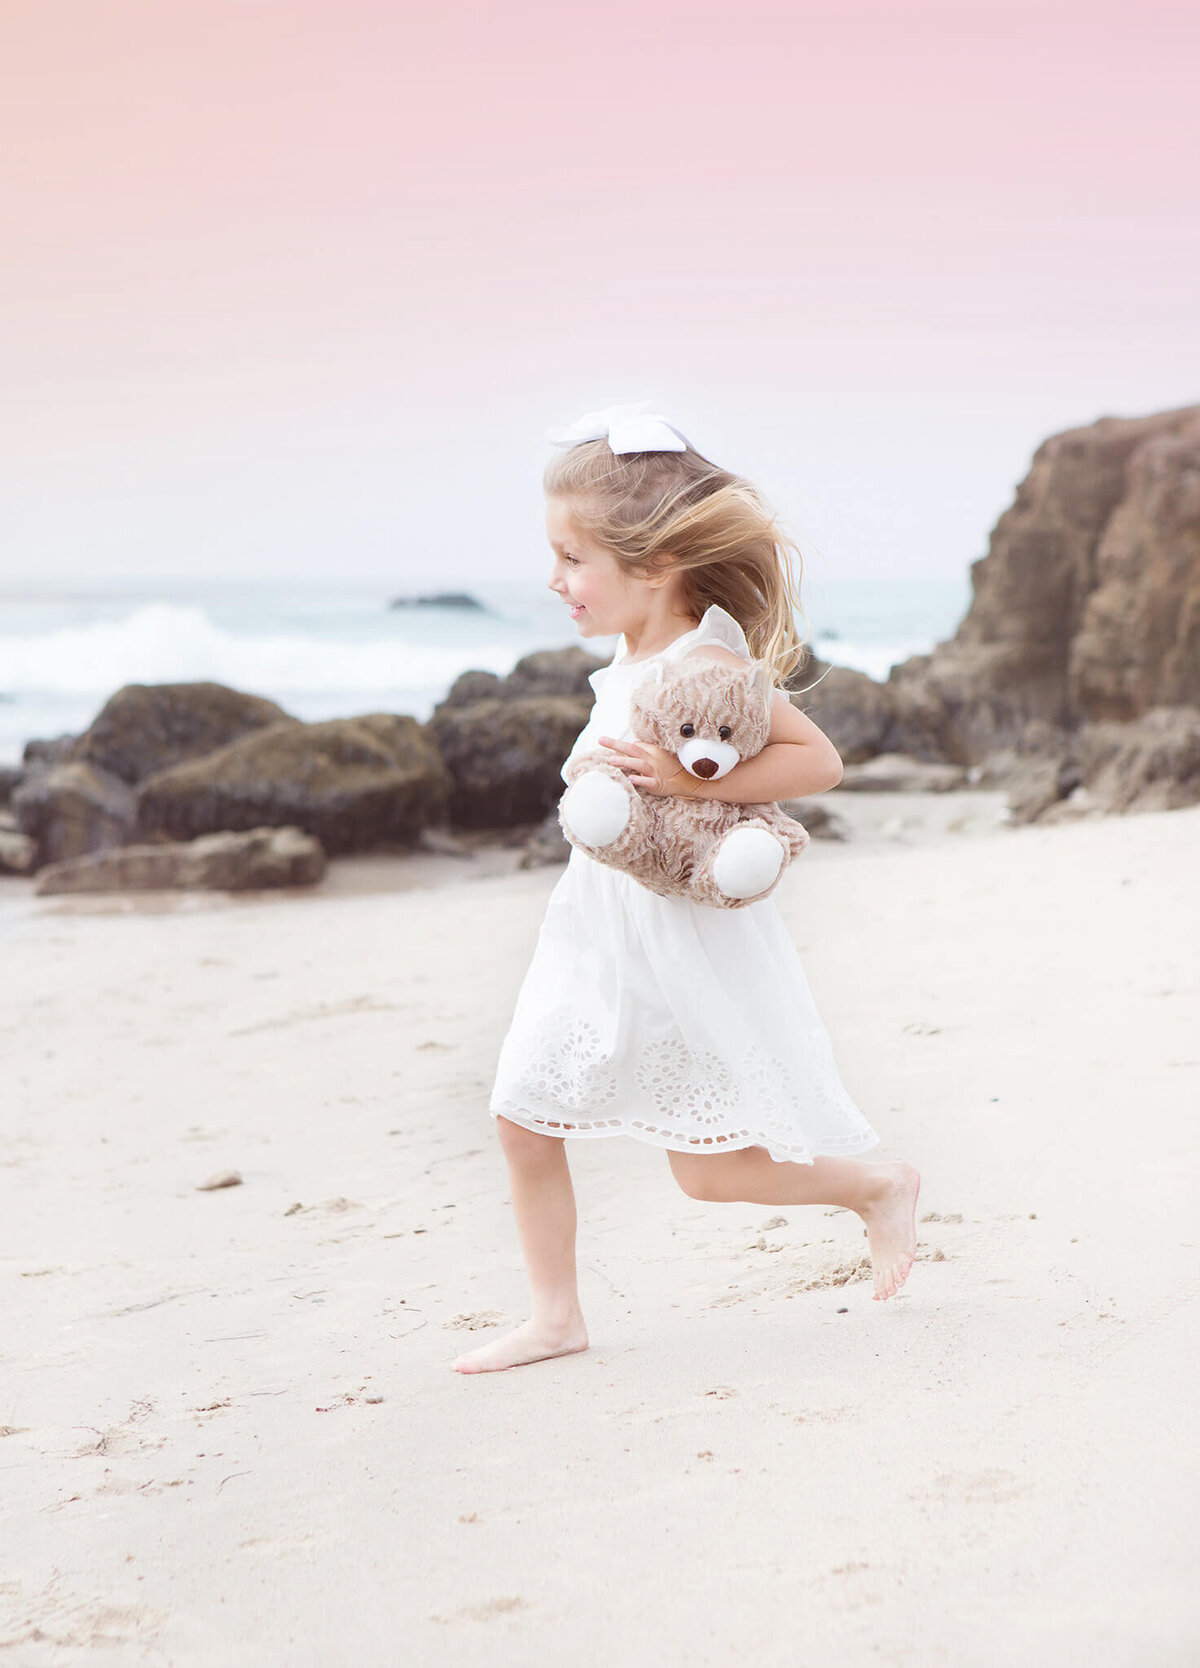 Little girl running through the sand at a Malibu park while holding her teddy - Los Angeles Children’s Photographer